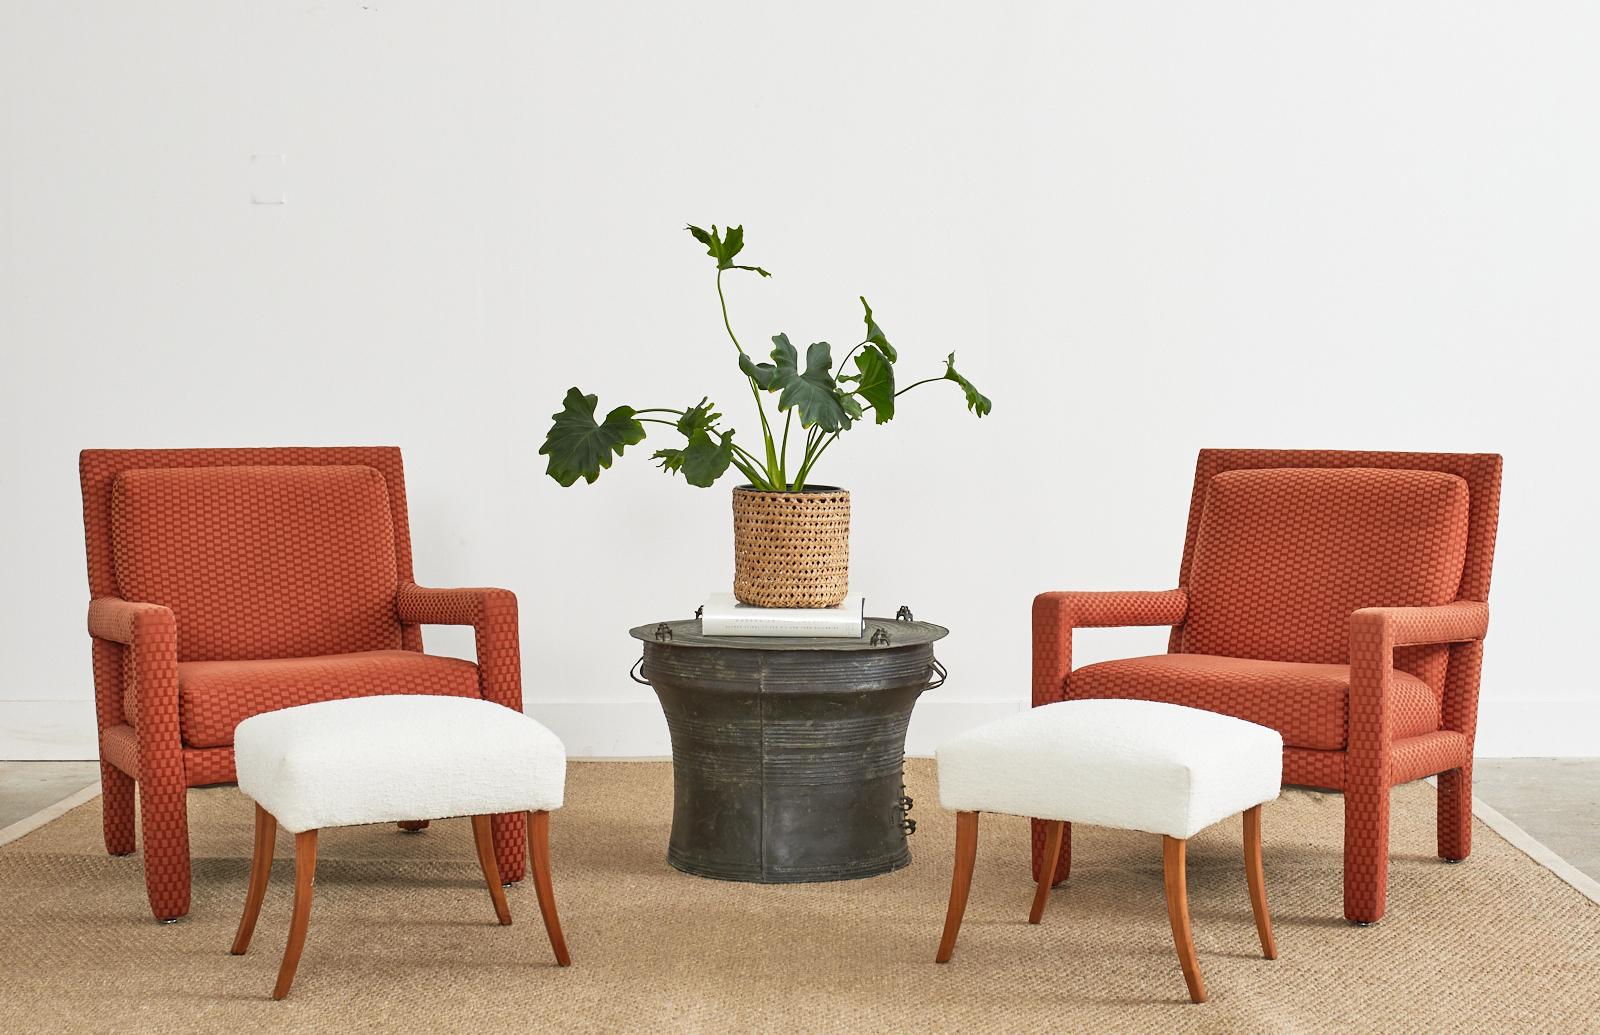 Fabulous pair of mid-century modern parsons chairs or armchairs made in the manner and style of Milo Baughman. The iconic chairs feature a strong wooden frame with large open arms and a slanted flat back. The back and seat have a thick pillow